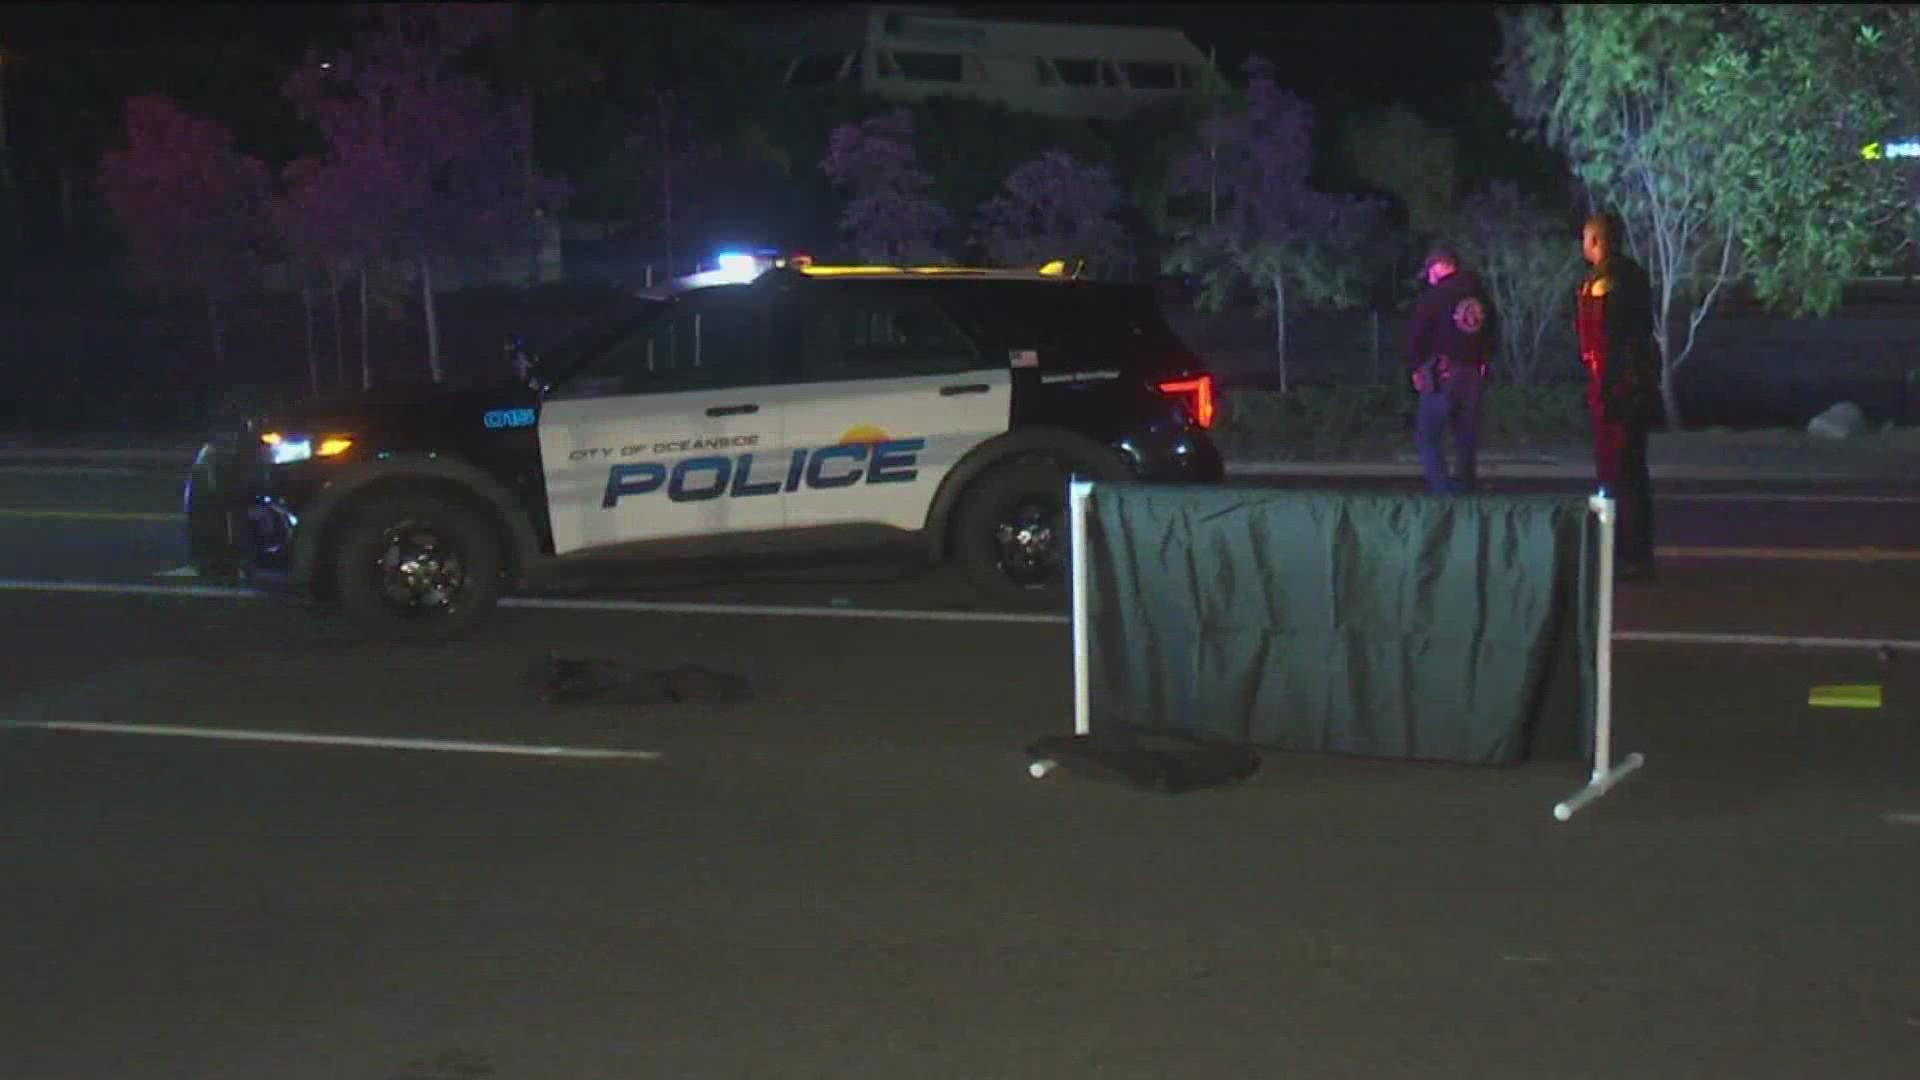 Oceanside Boulevard was closed for several hours, but reopened overnight. No victims have been identified, according to the Oceanside Police Department.